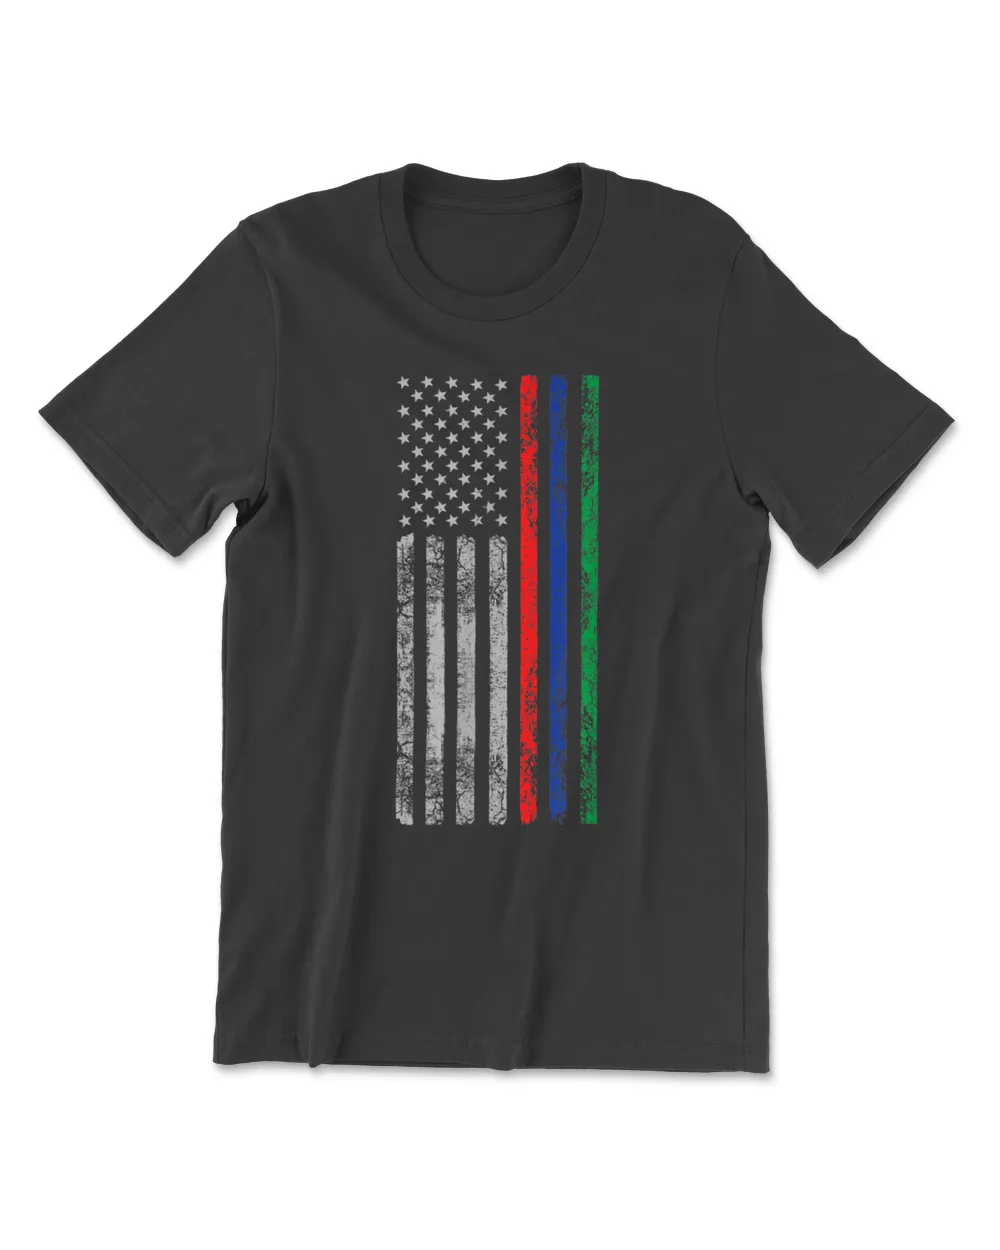 Thin Red Blue Green Line Tee Police Firefighters Military